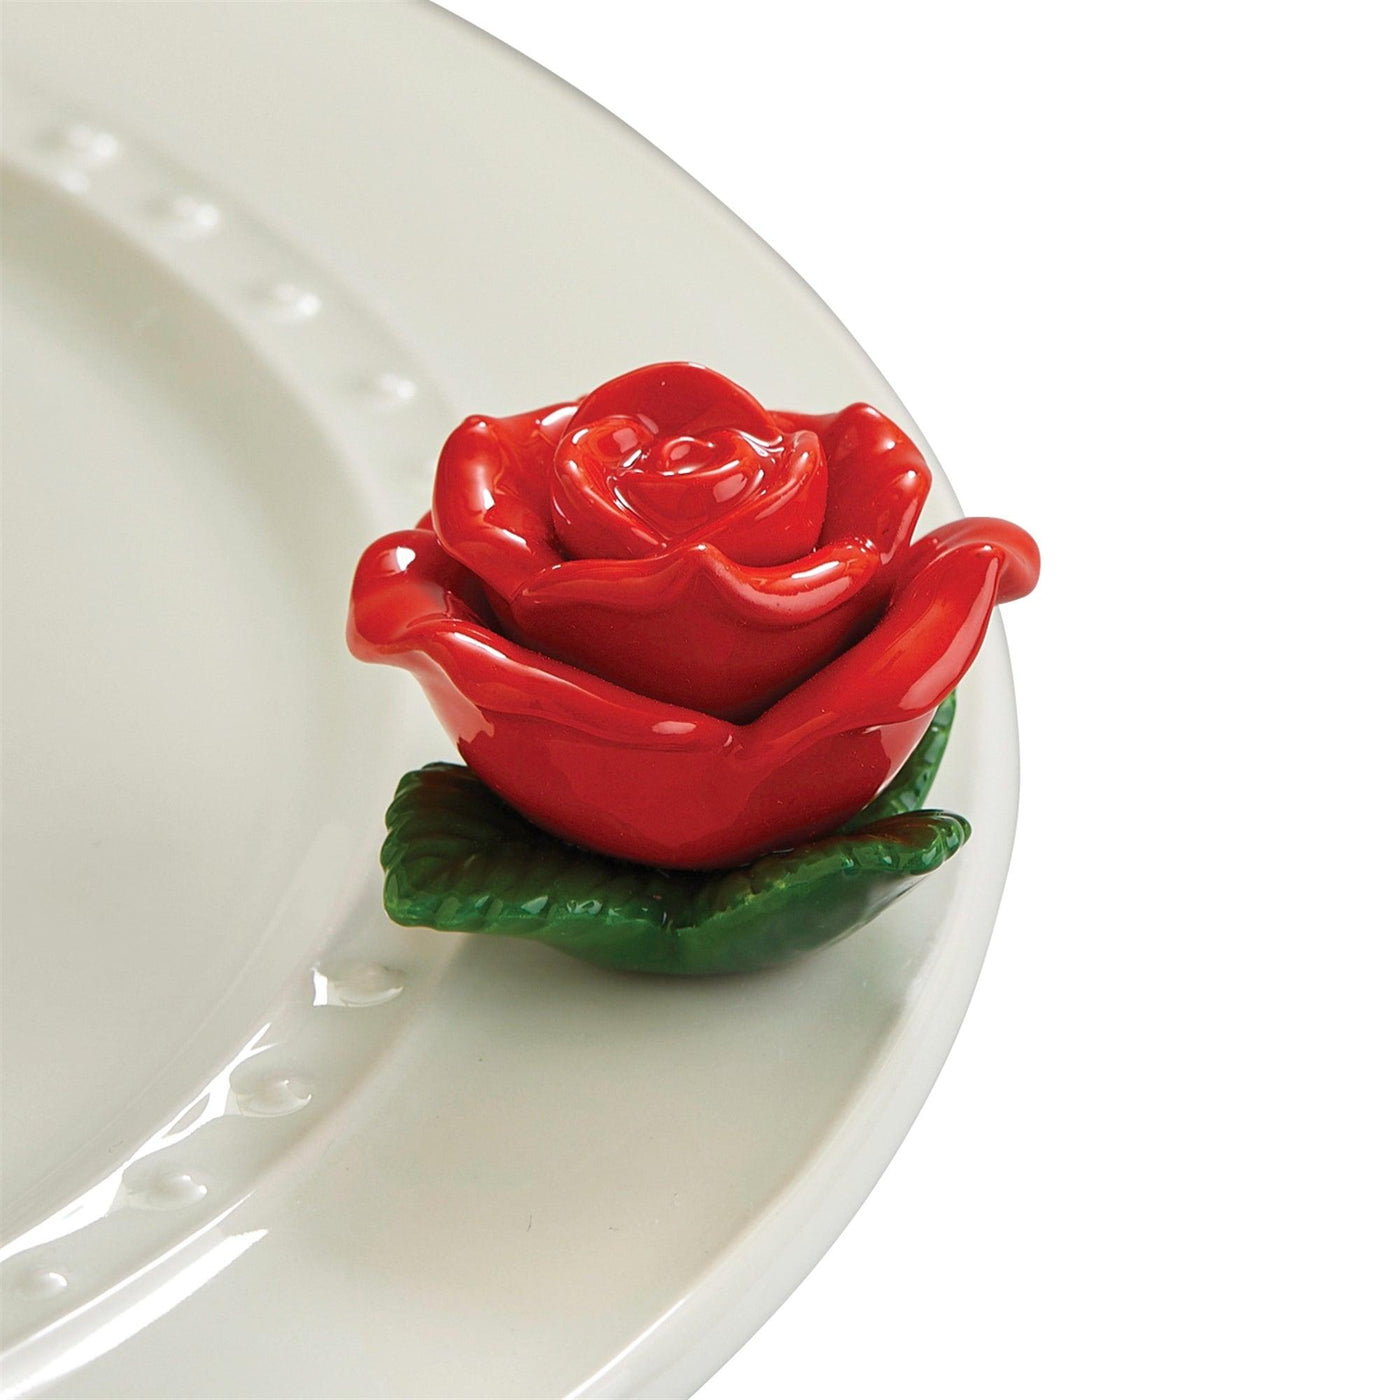 Red rose with green leaves on the base mini for a Nora Fleming dish